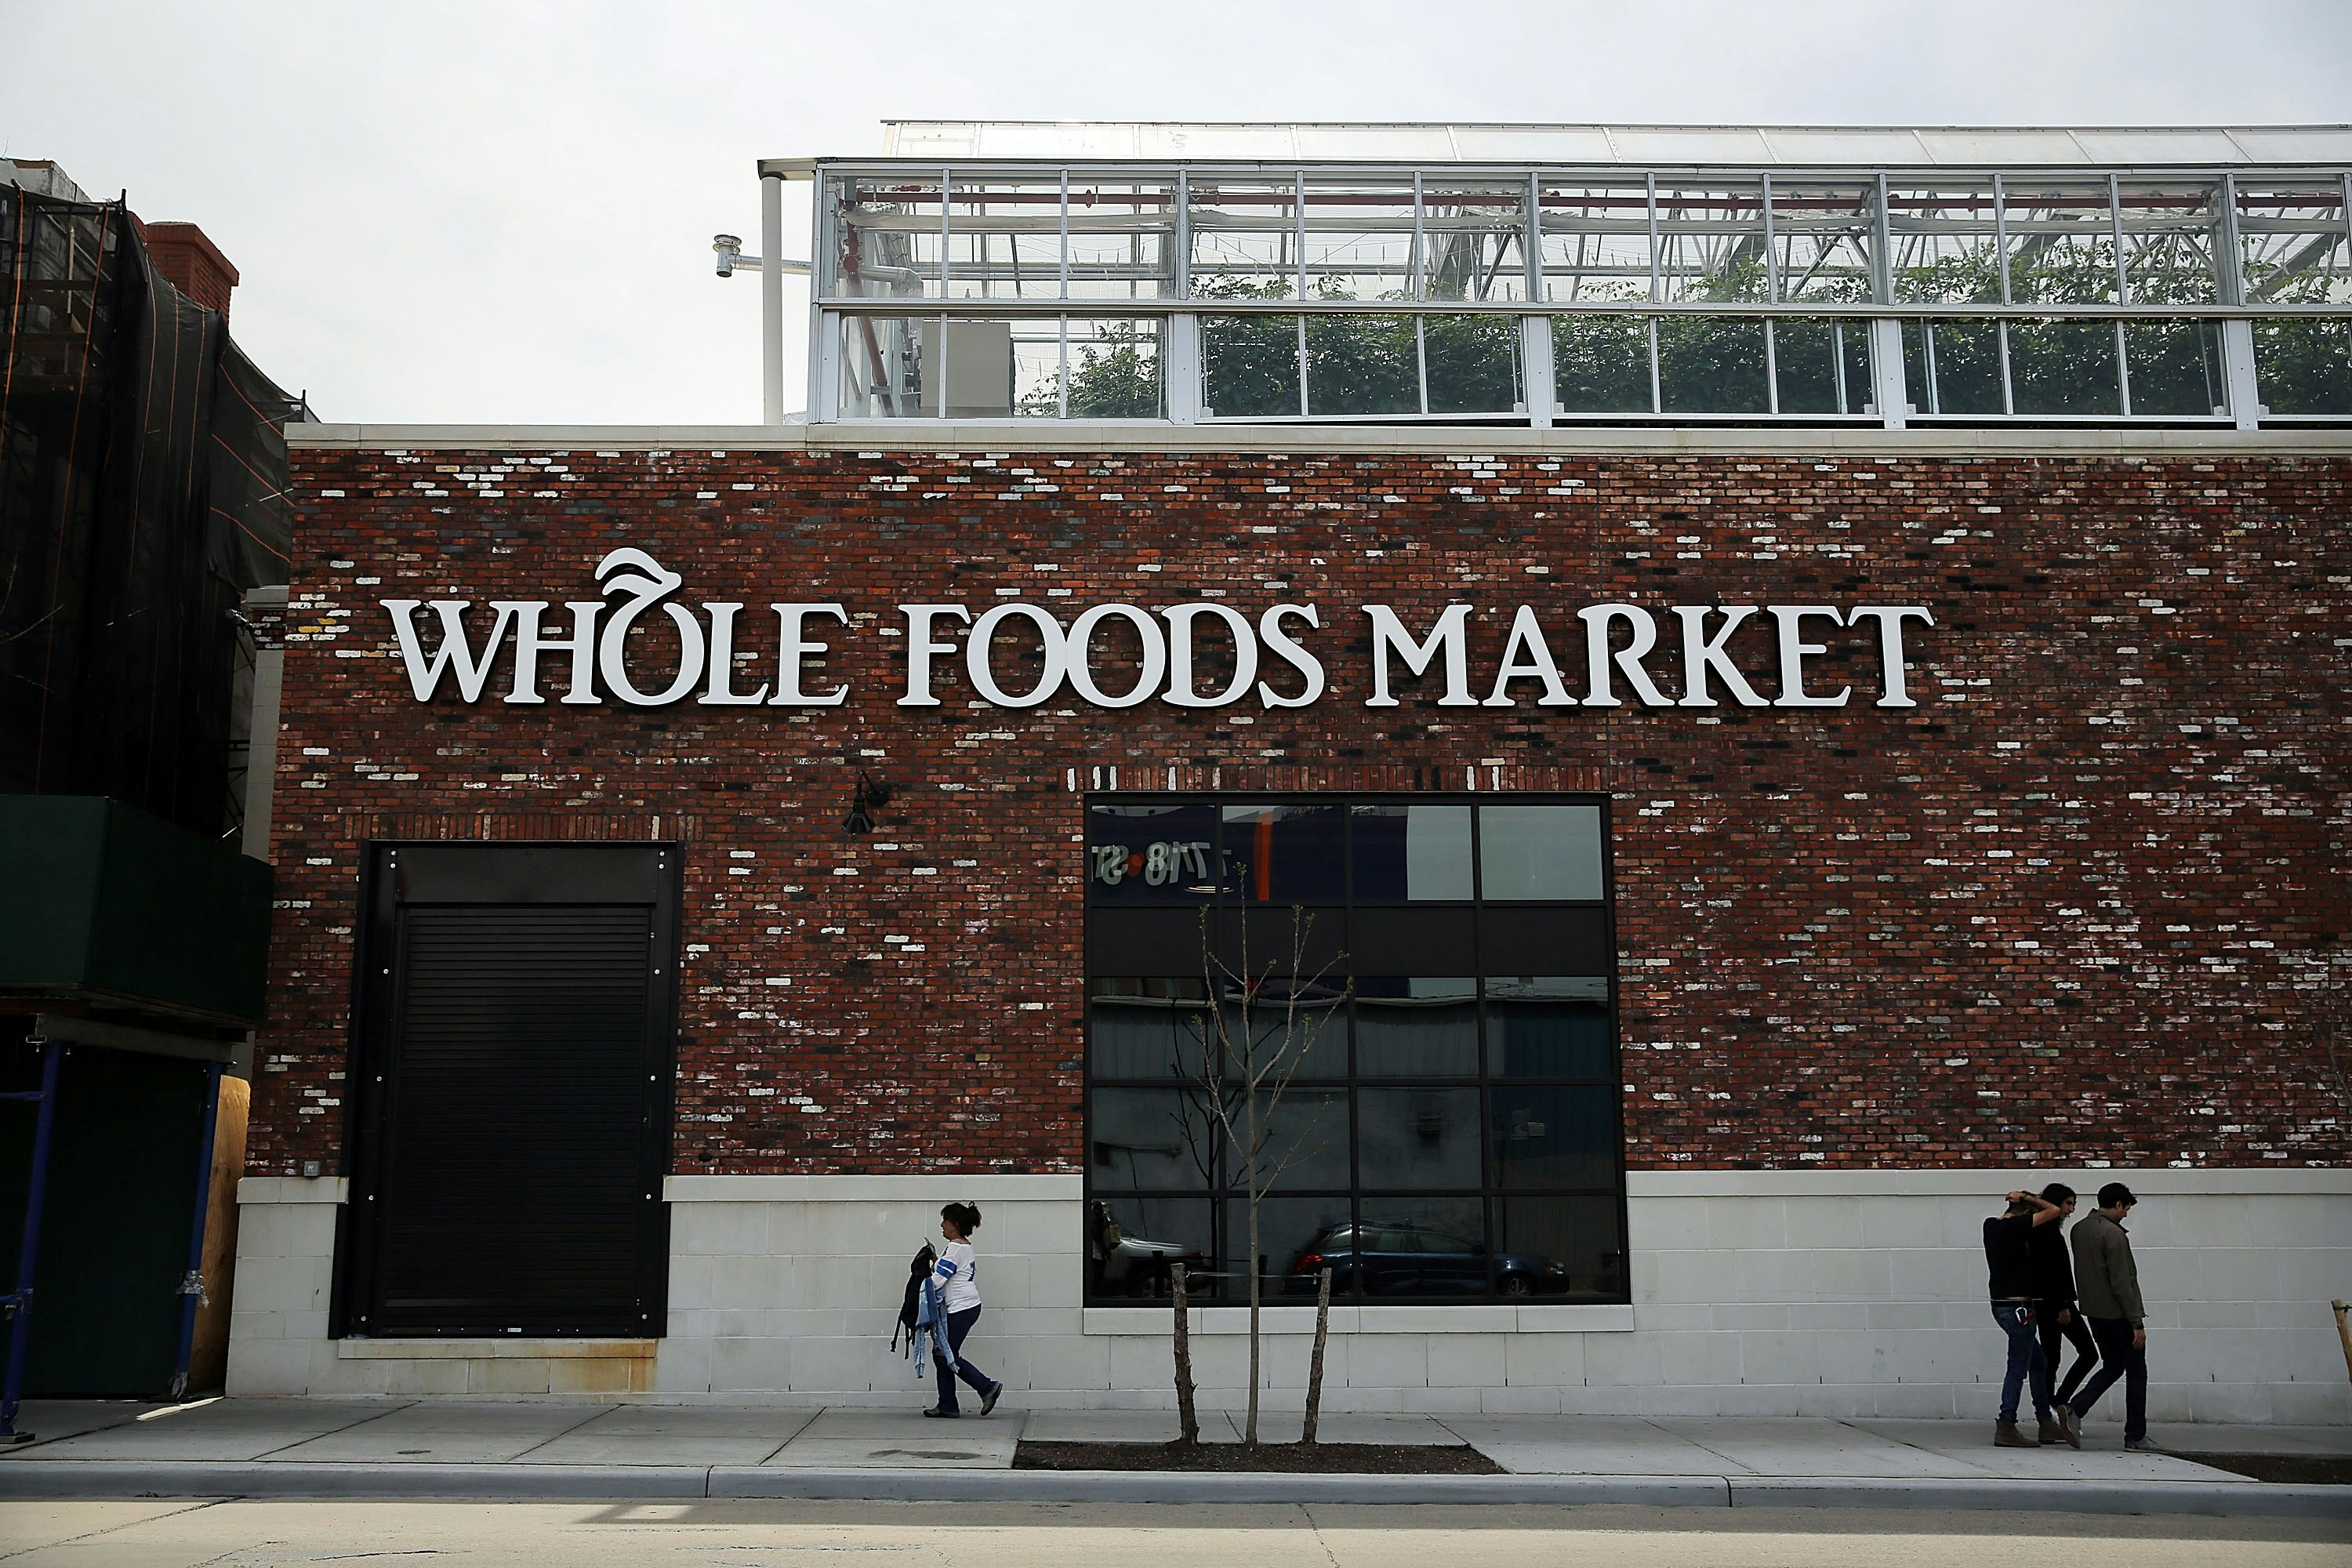 whole foods hours christmas day 2020 When Is Whole Foods Open On Christmas Eve 2018 Their Hours Might Make You Change Your Holiday Shopping Plans whole foods hours christmas day 2020